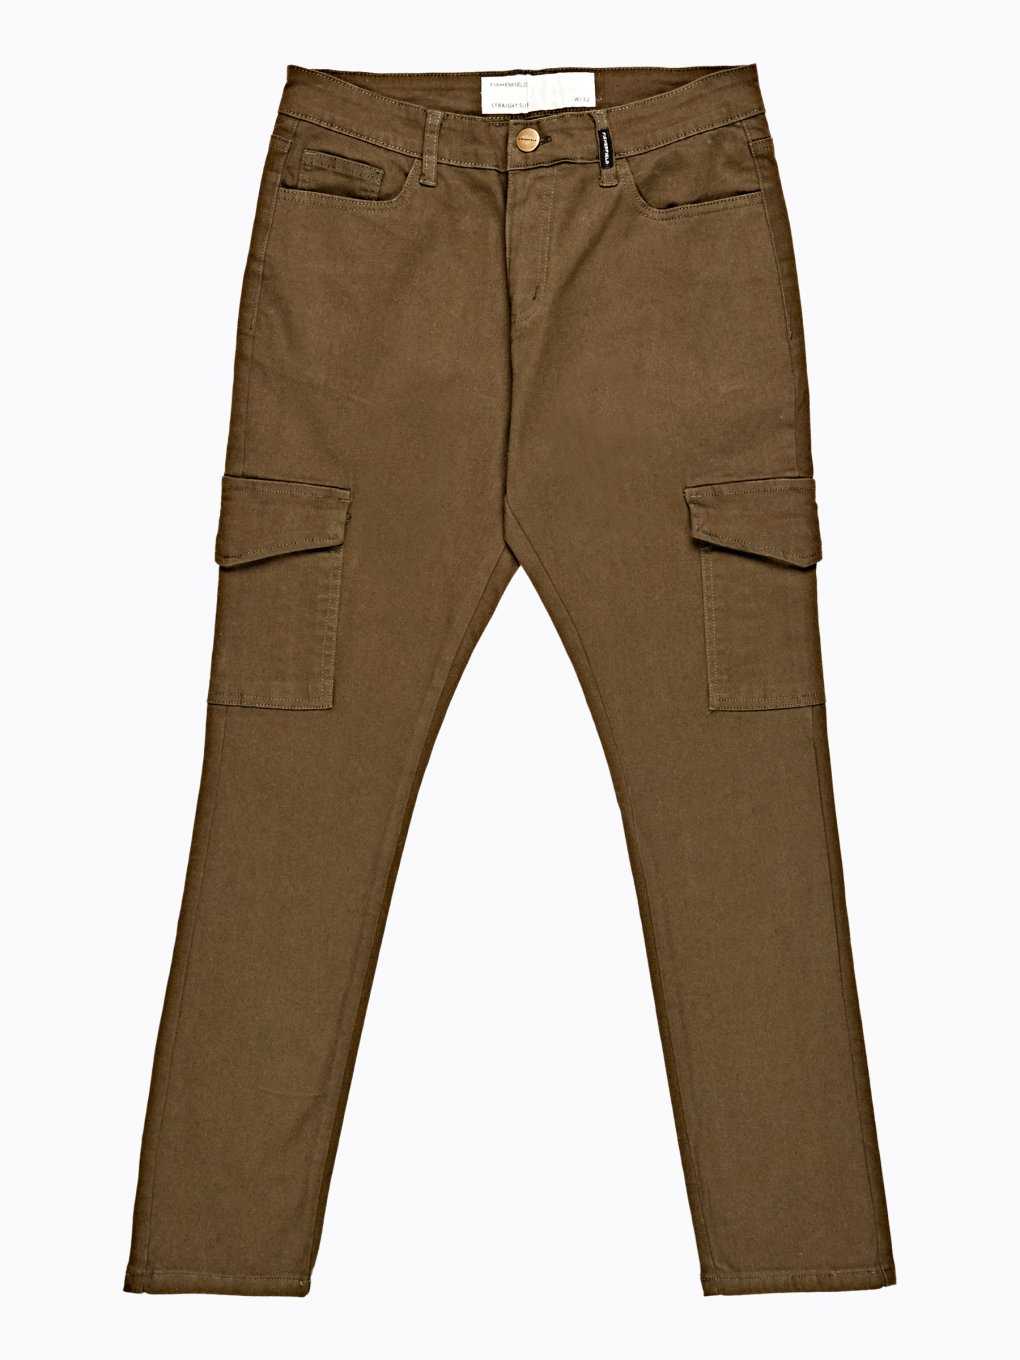 Cagro trousers